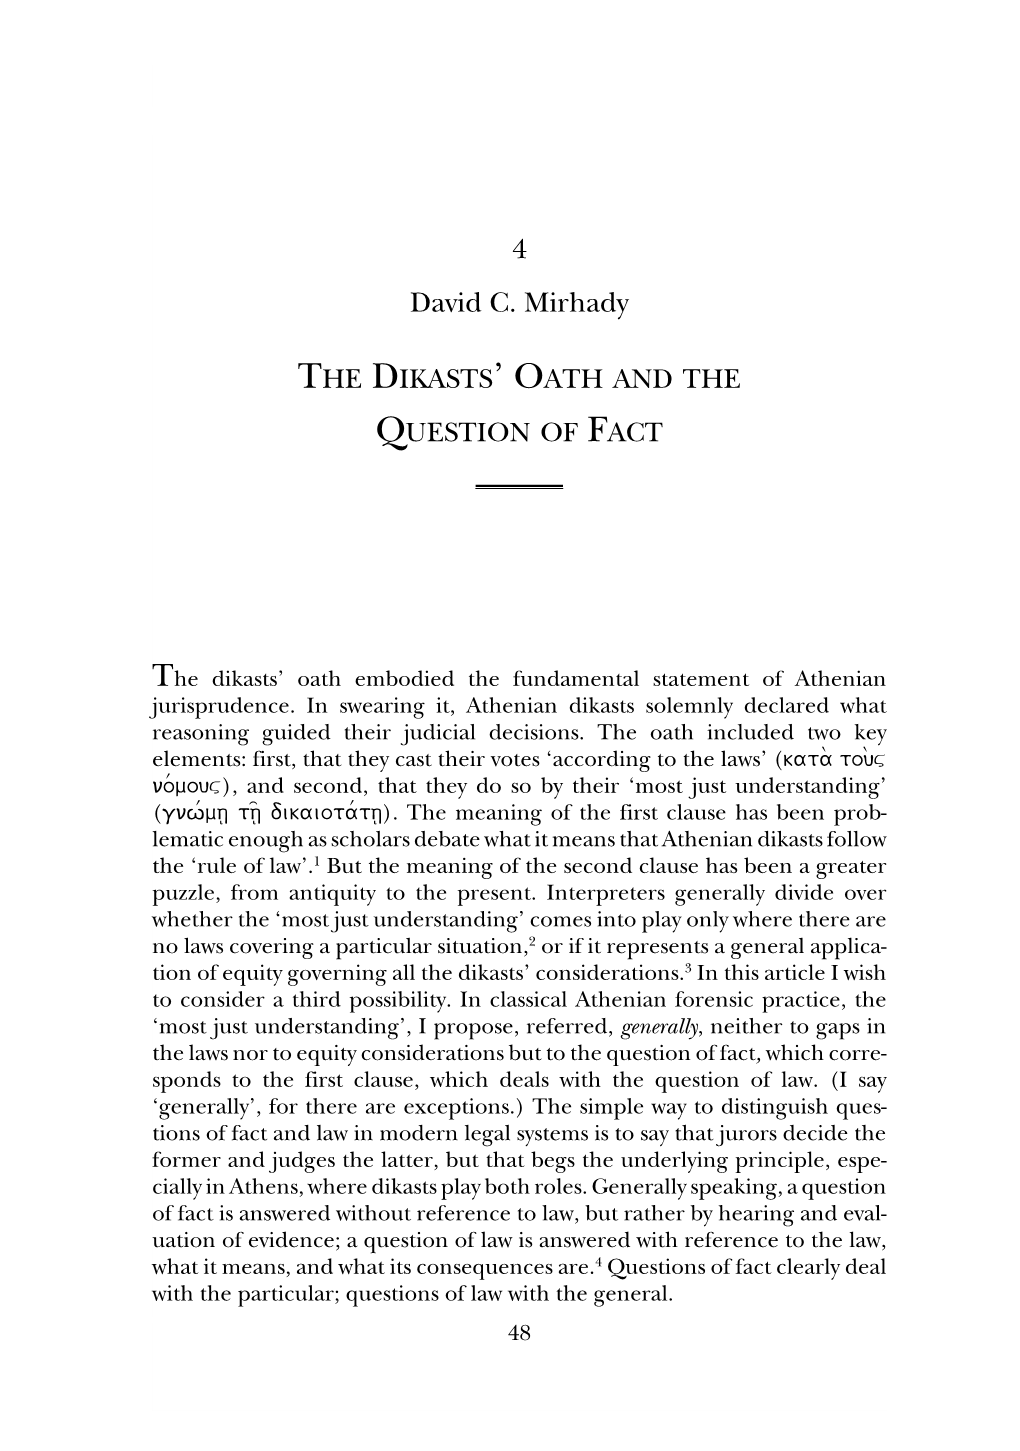 The Dikasts' Oath and the Question of Fact